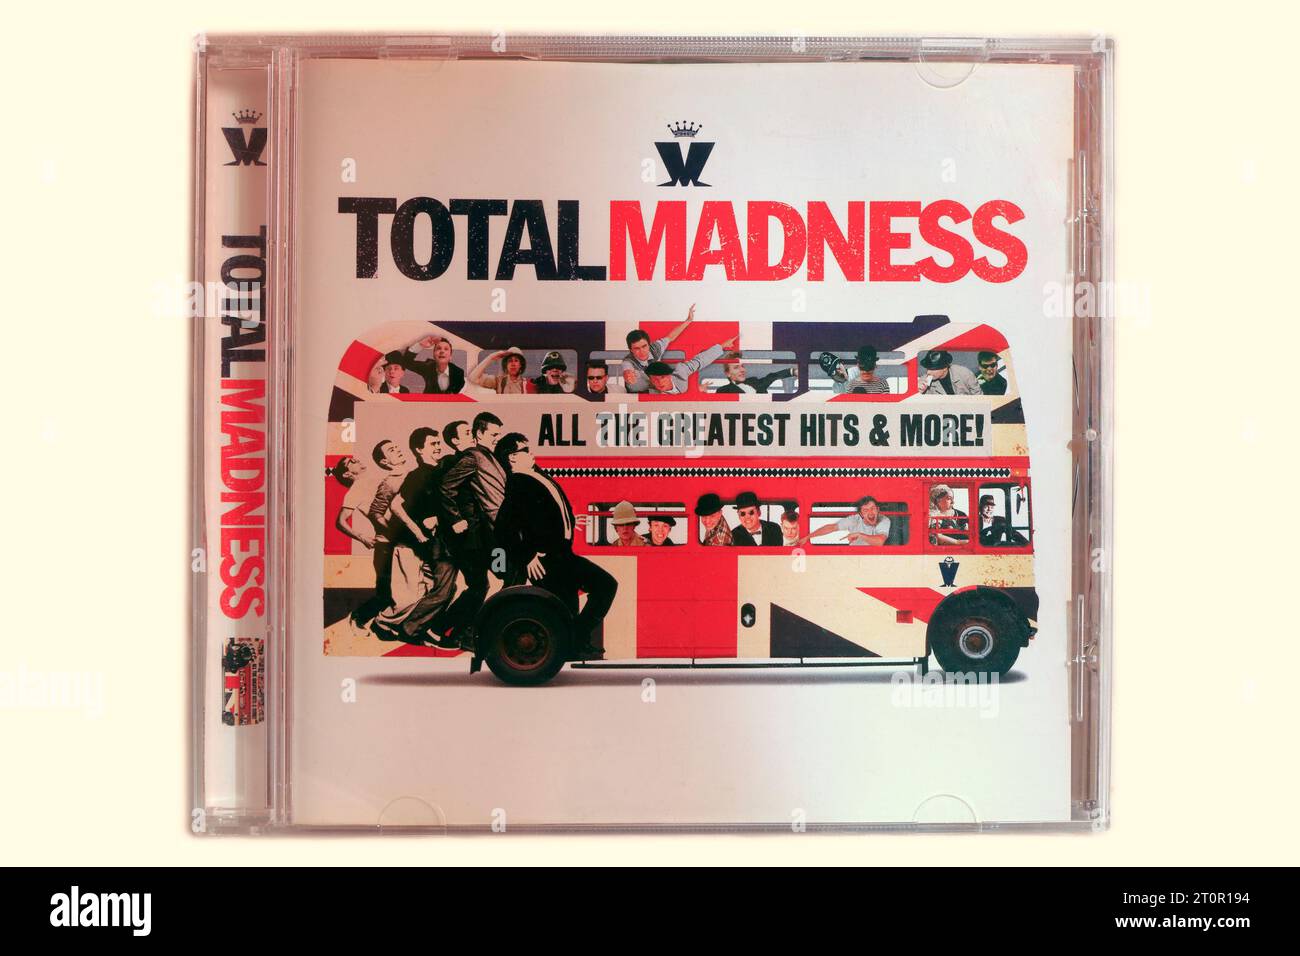 Madness - Total Madness - All The Greatest Hits & More! CD case on light background Stock Photo